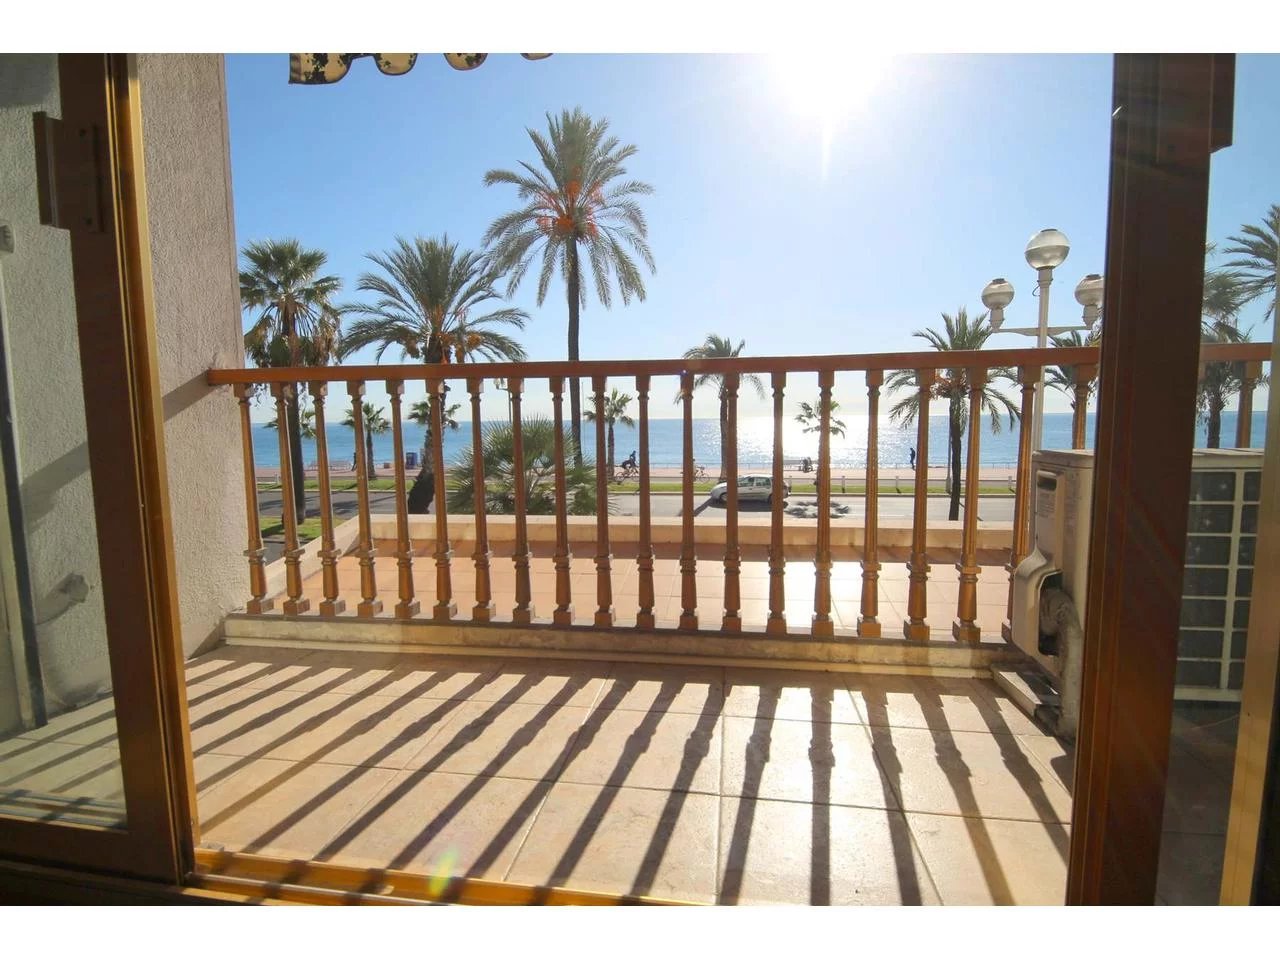 Appartement  3 Rooms 80.93m2  for sale   690 000 €